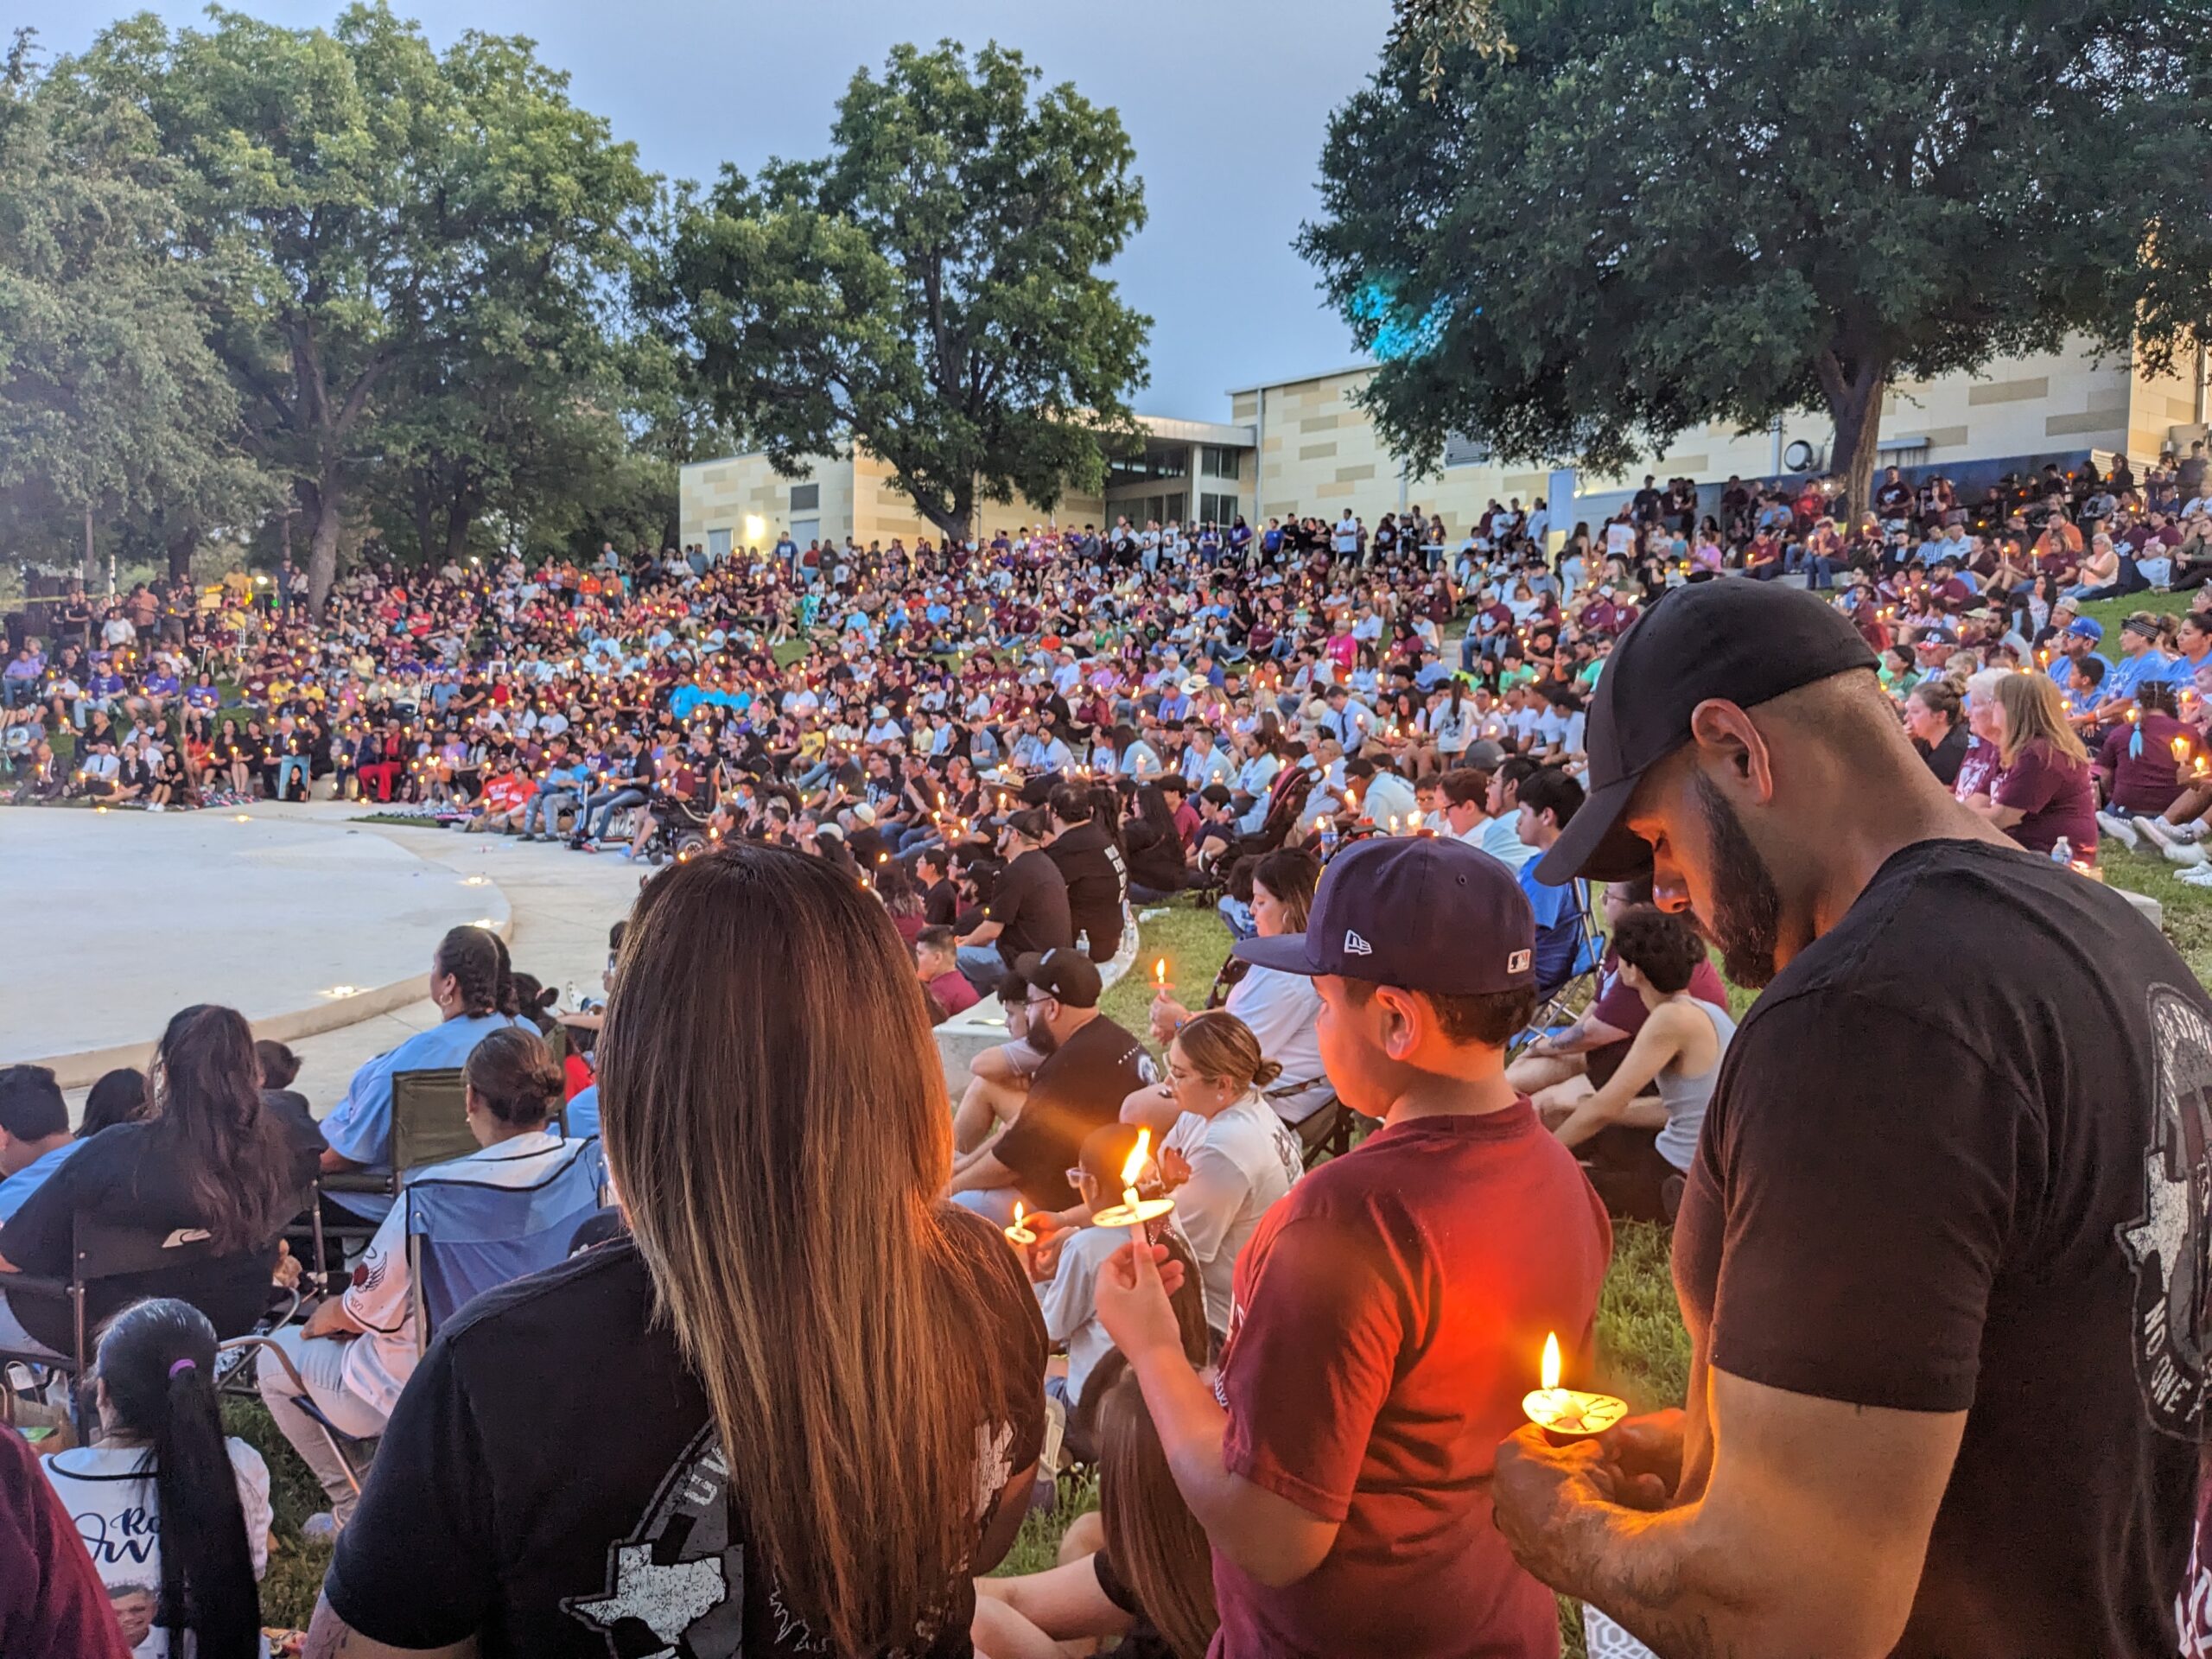 hundreds gathered for a vigil at an outdoor amphitheater sandwiched between the city’s civic center and the Leona River.